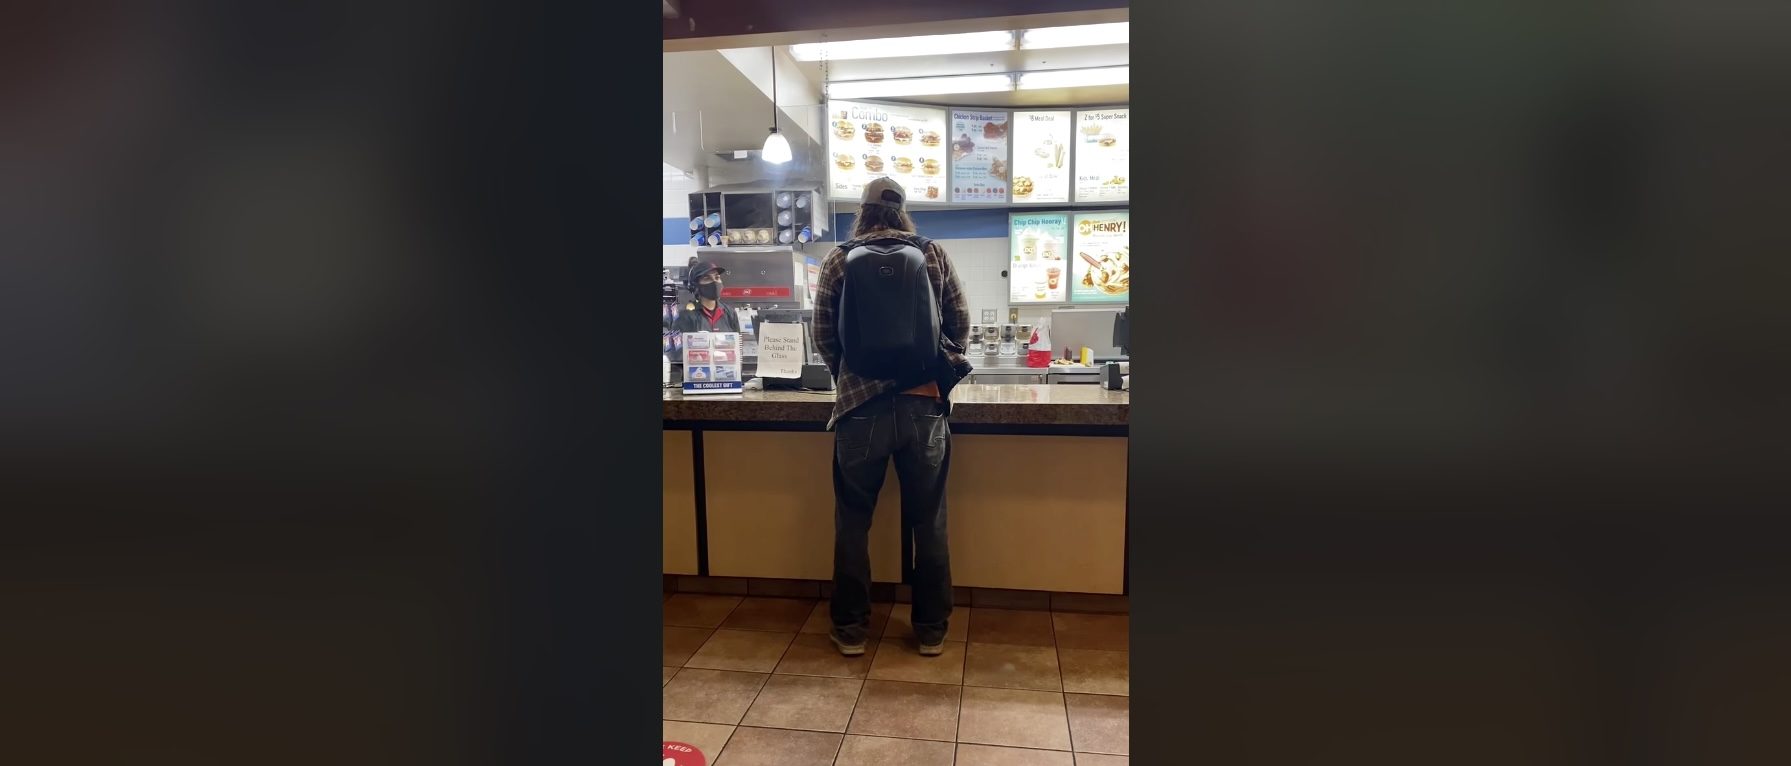 Customer Pees On Counter At Dairy Queen After Being Told To Wear A Mask ...